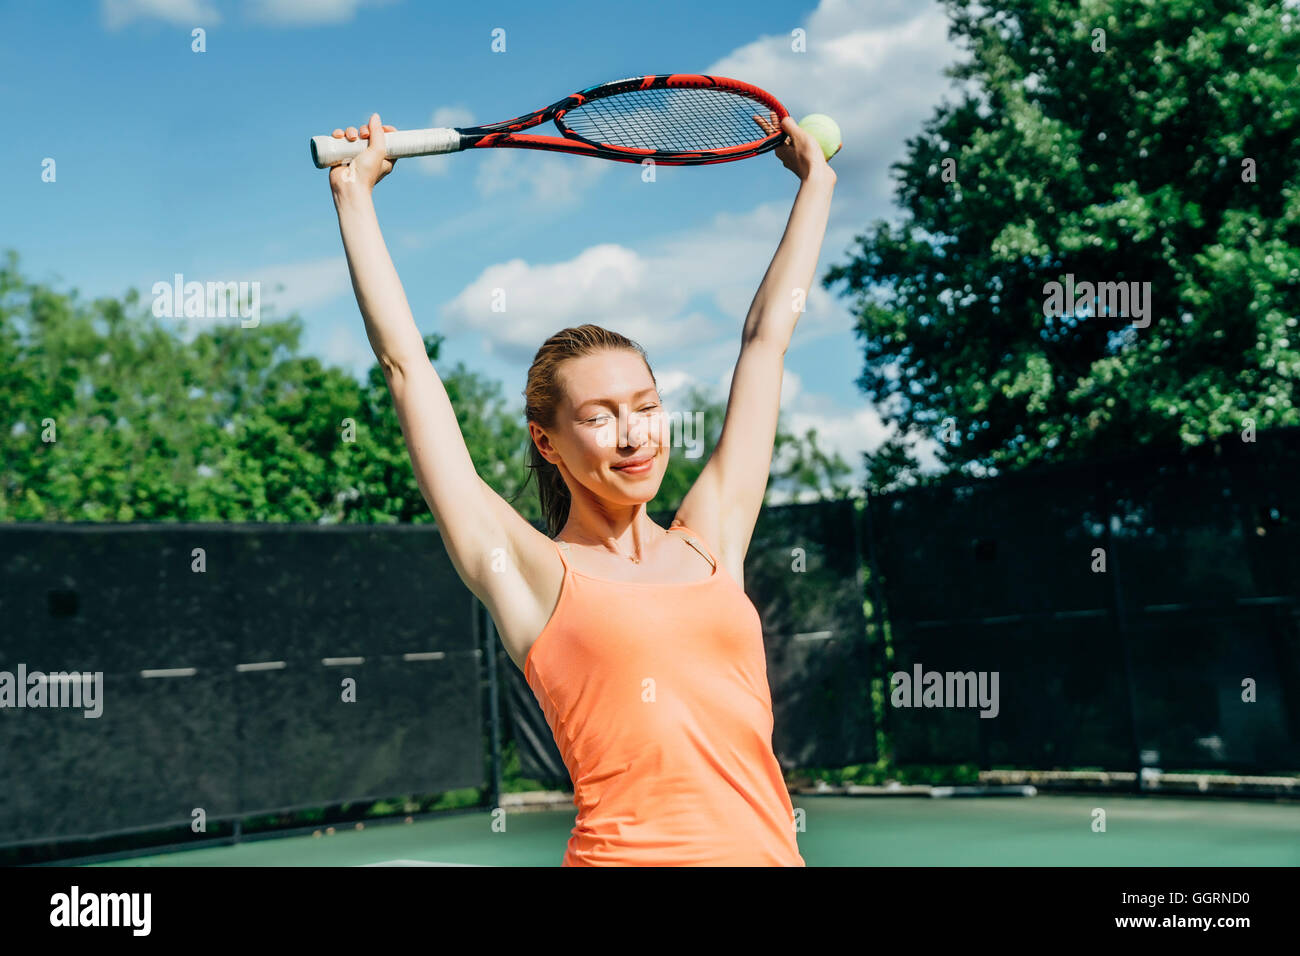 Caucasian woman stretching arms on tennis court Stock Photo